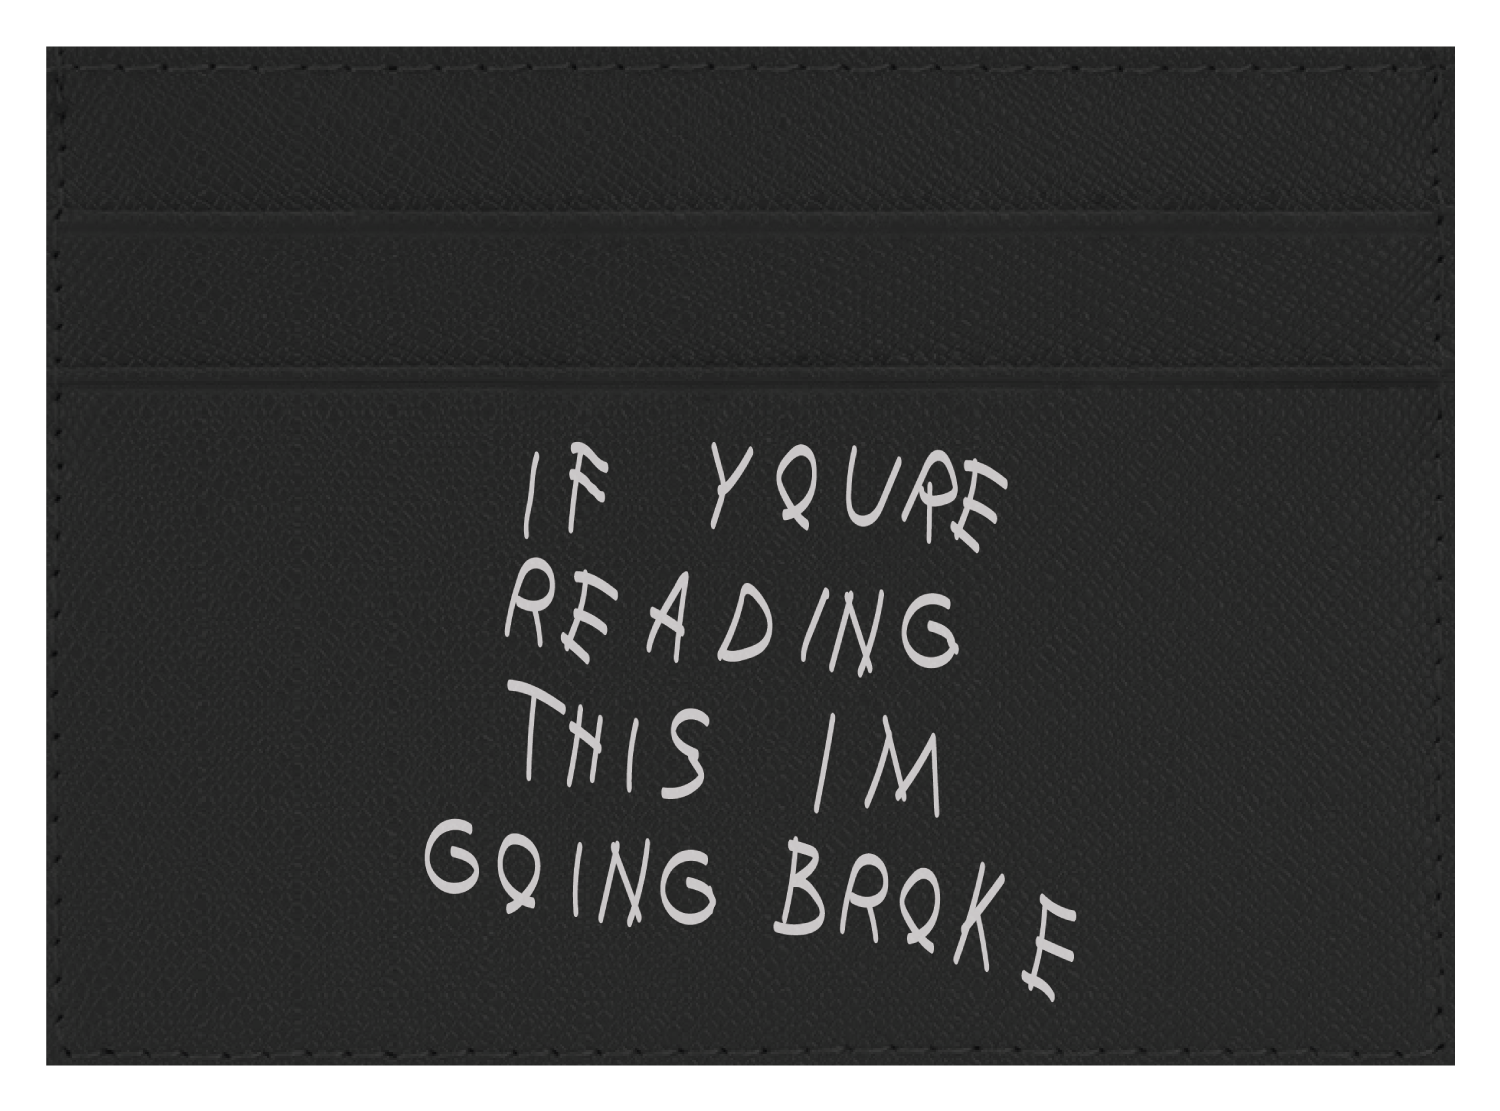 If you are Reading this